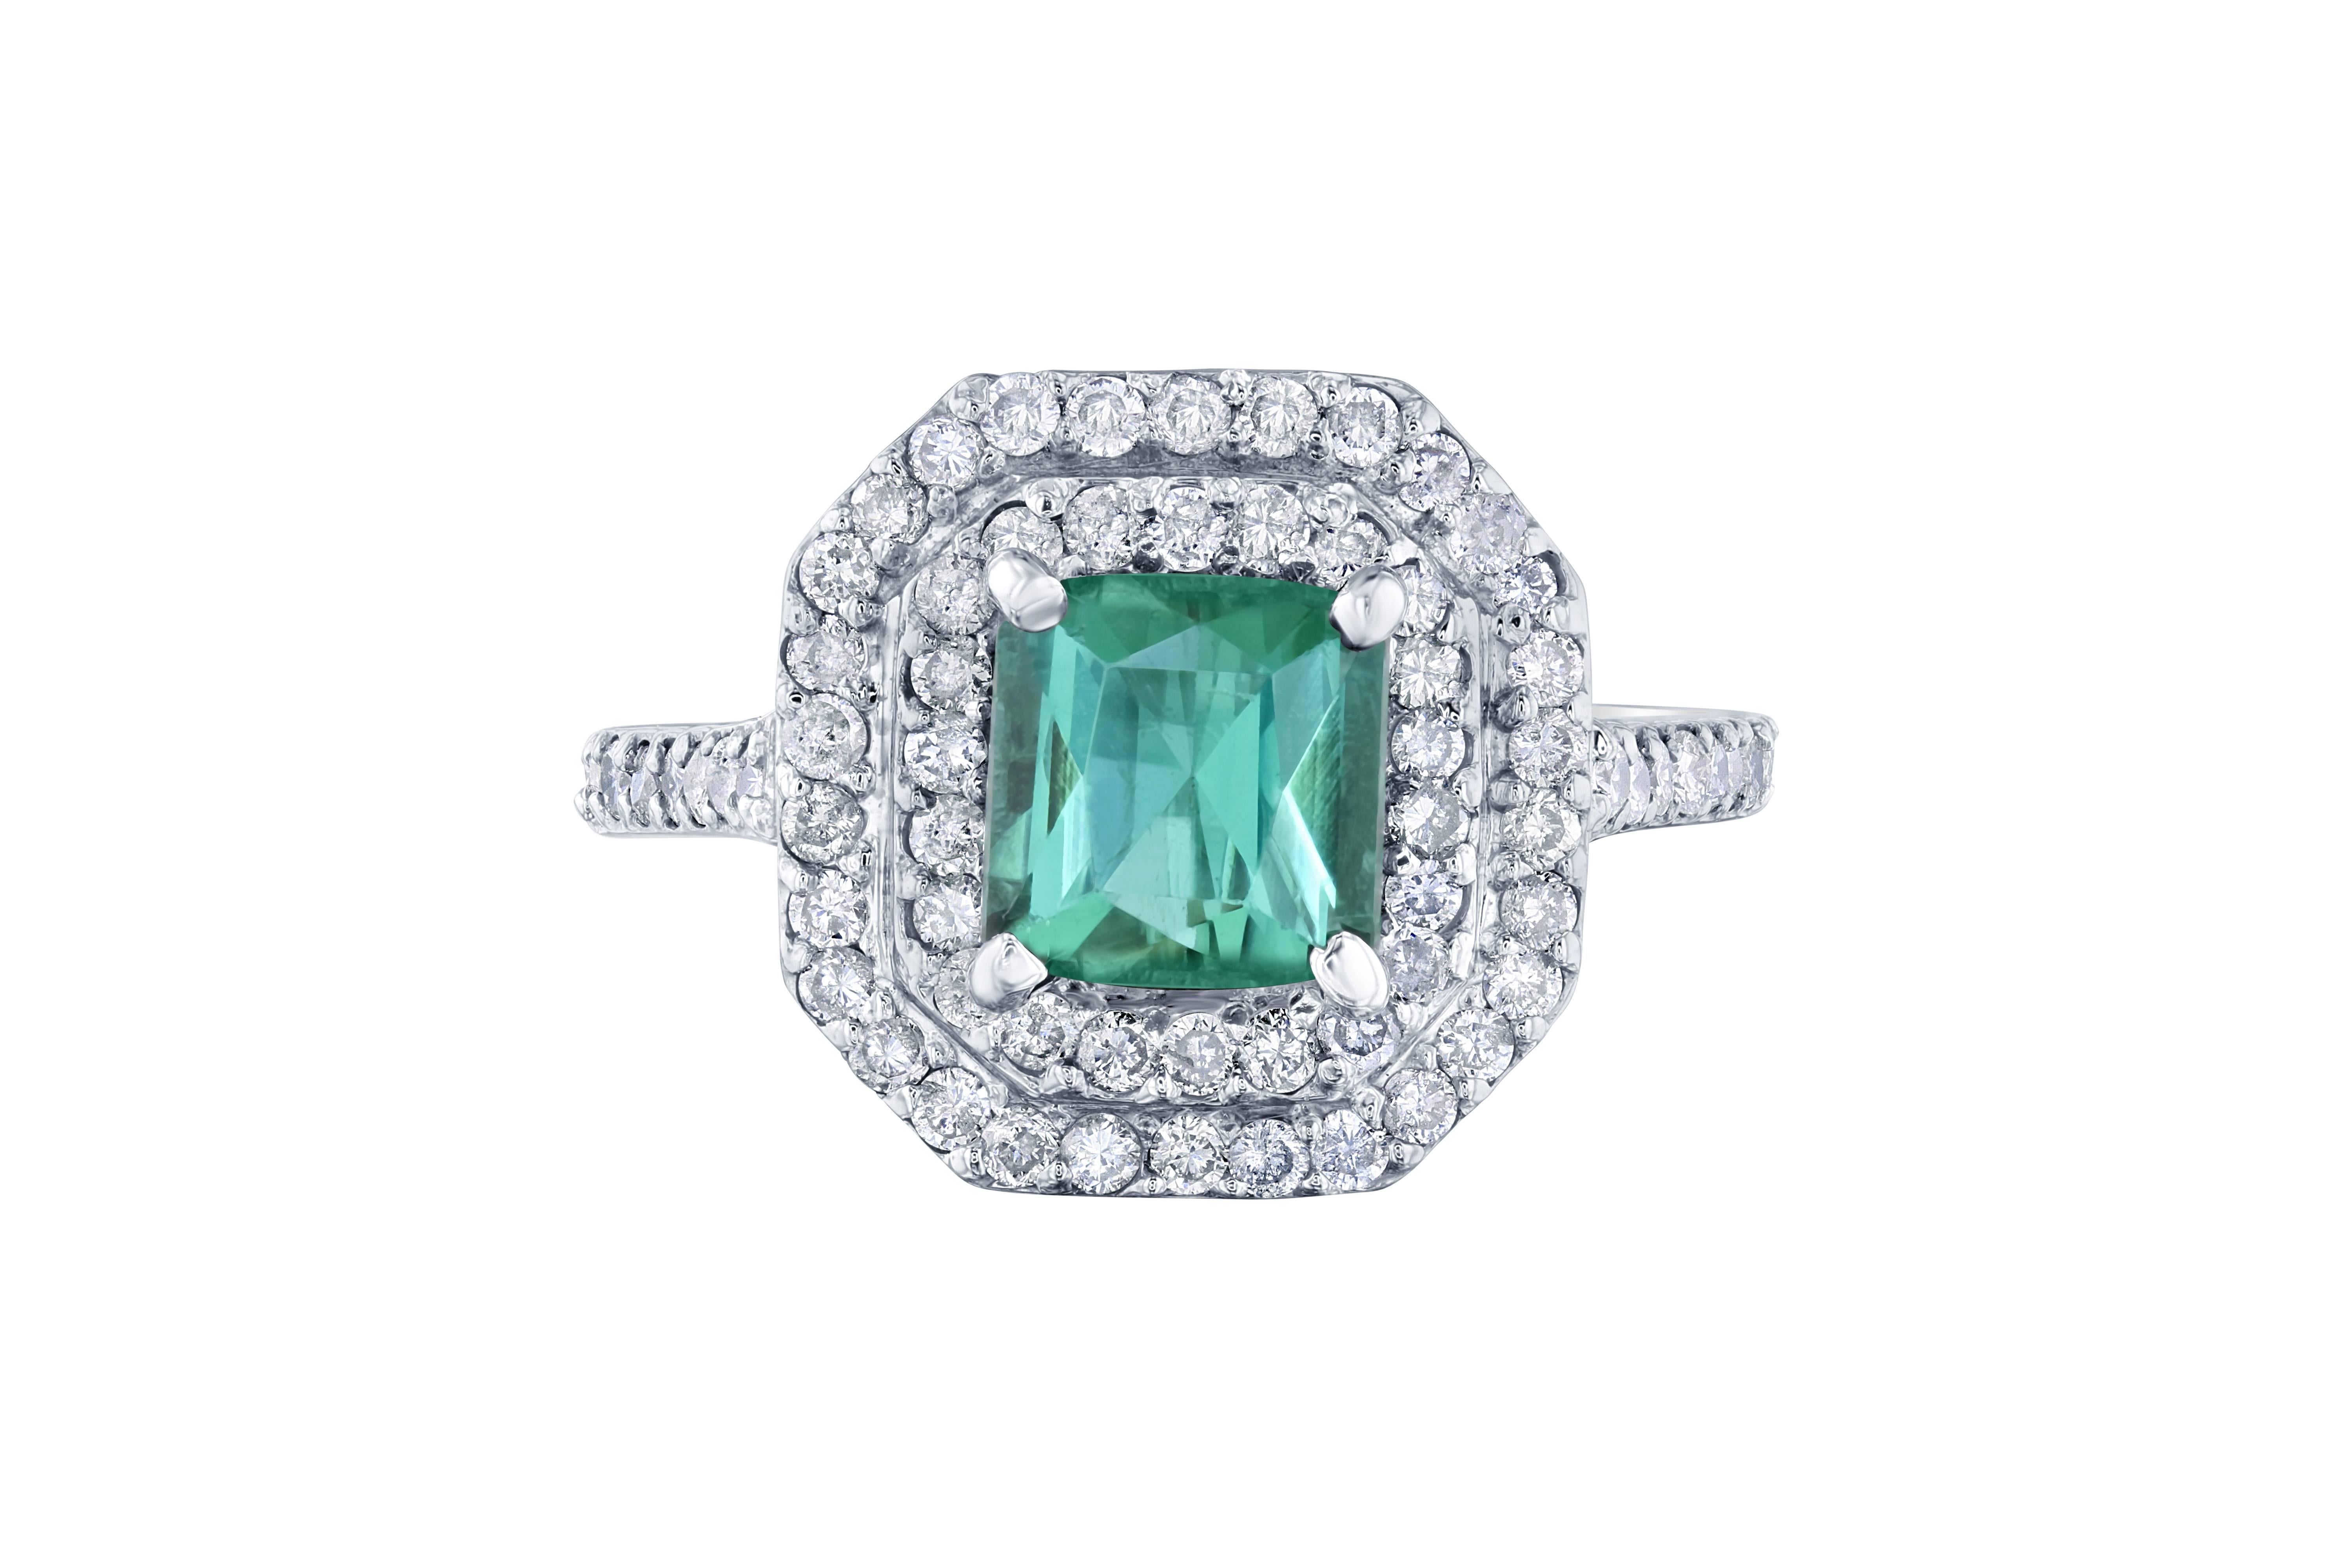 Stunning Green Tourmaline and Diamonds set in a double halo setting! This ring has a 1.75 carat Square Cut Green Tourmaline in the center of the ring and is surrounded by 94 Round Cut Diamonds that weigh 1.00 carats. The total weight of this ring is